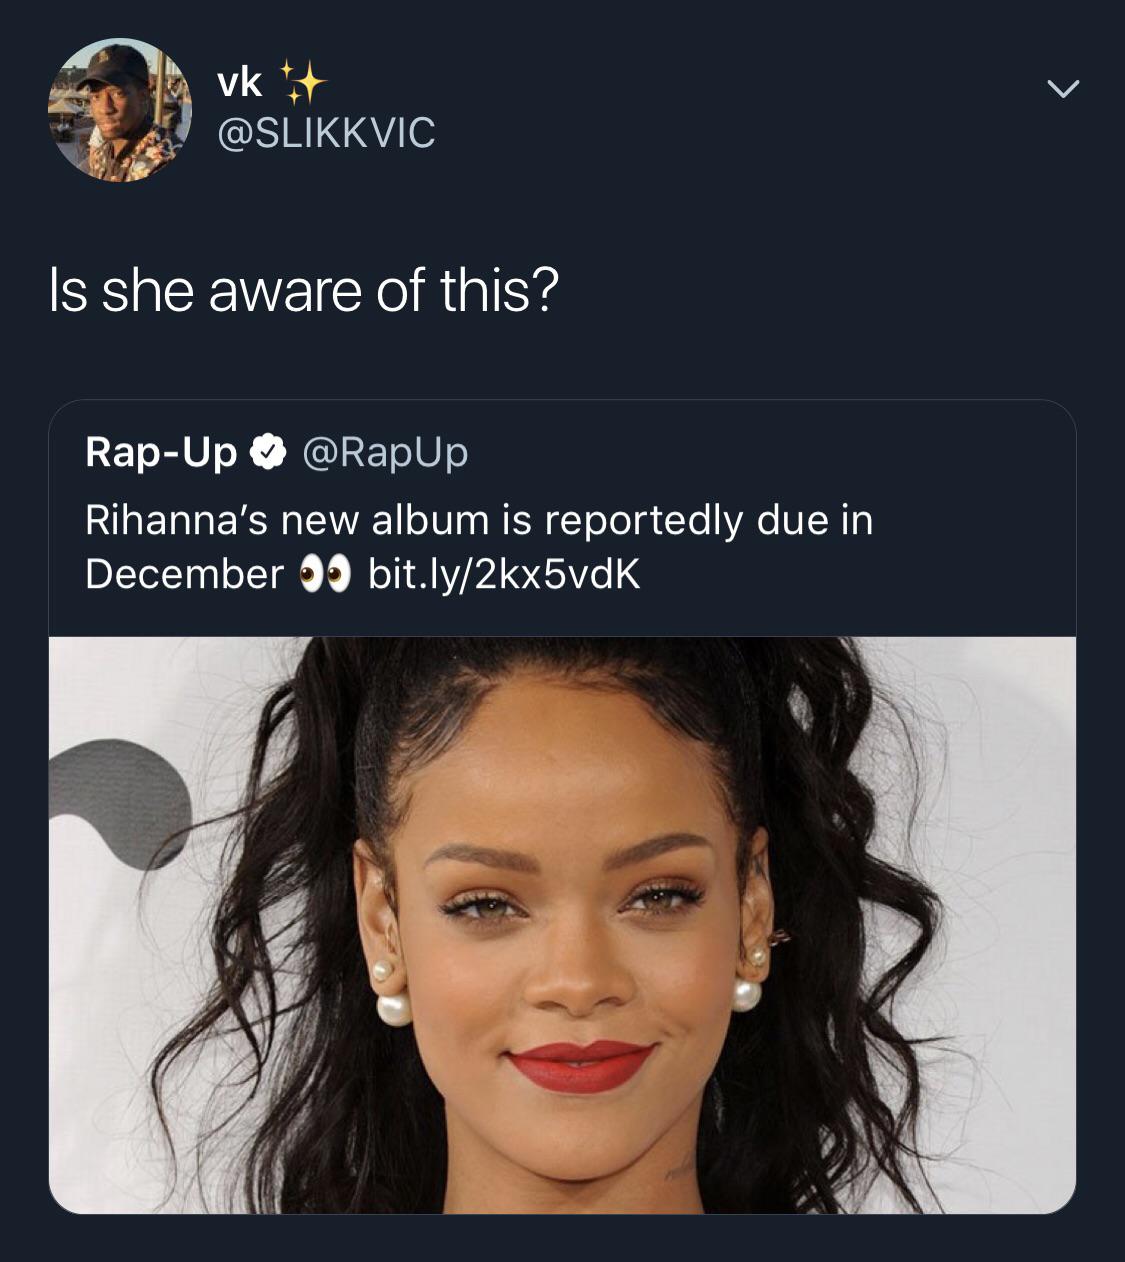 rihanna 2000 - vk 'Is she aware of this? RapUp Rihanna's new album is reportedly due in December bit.ly2kx5vdK